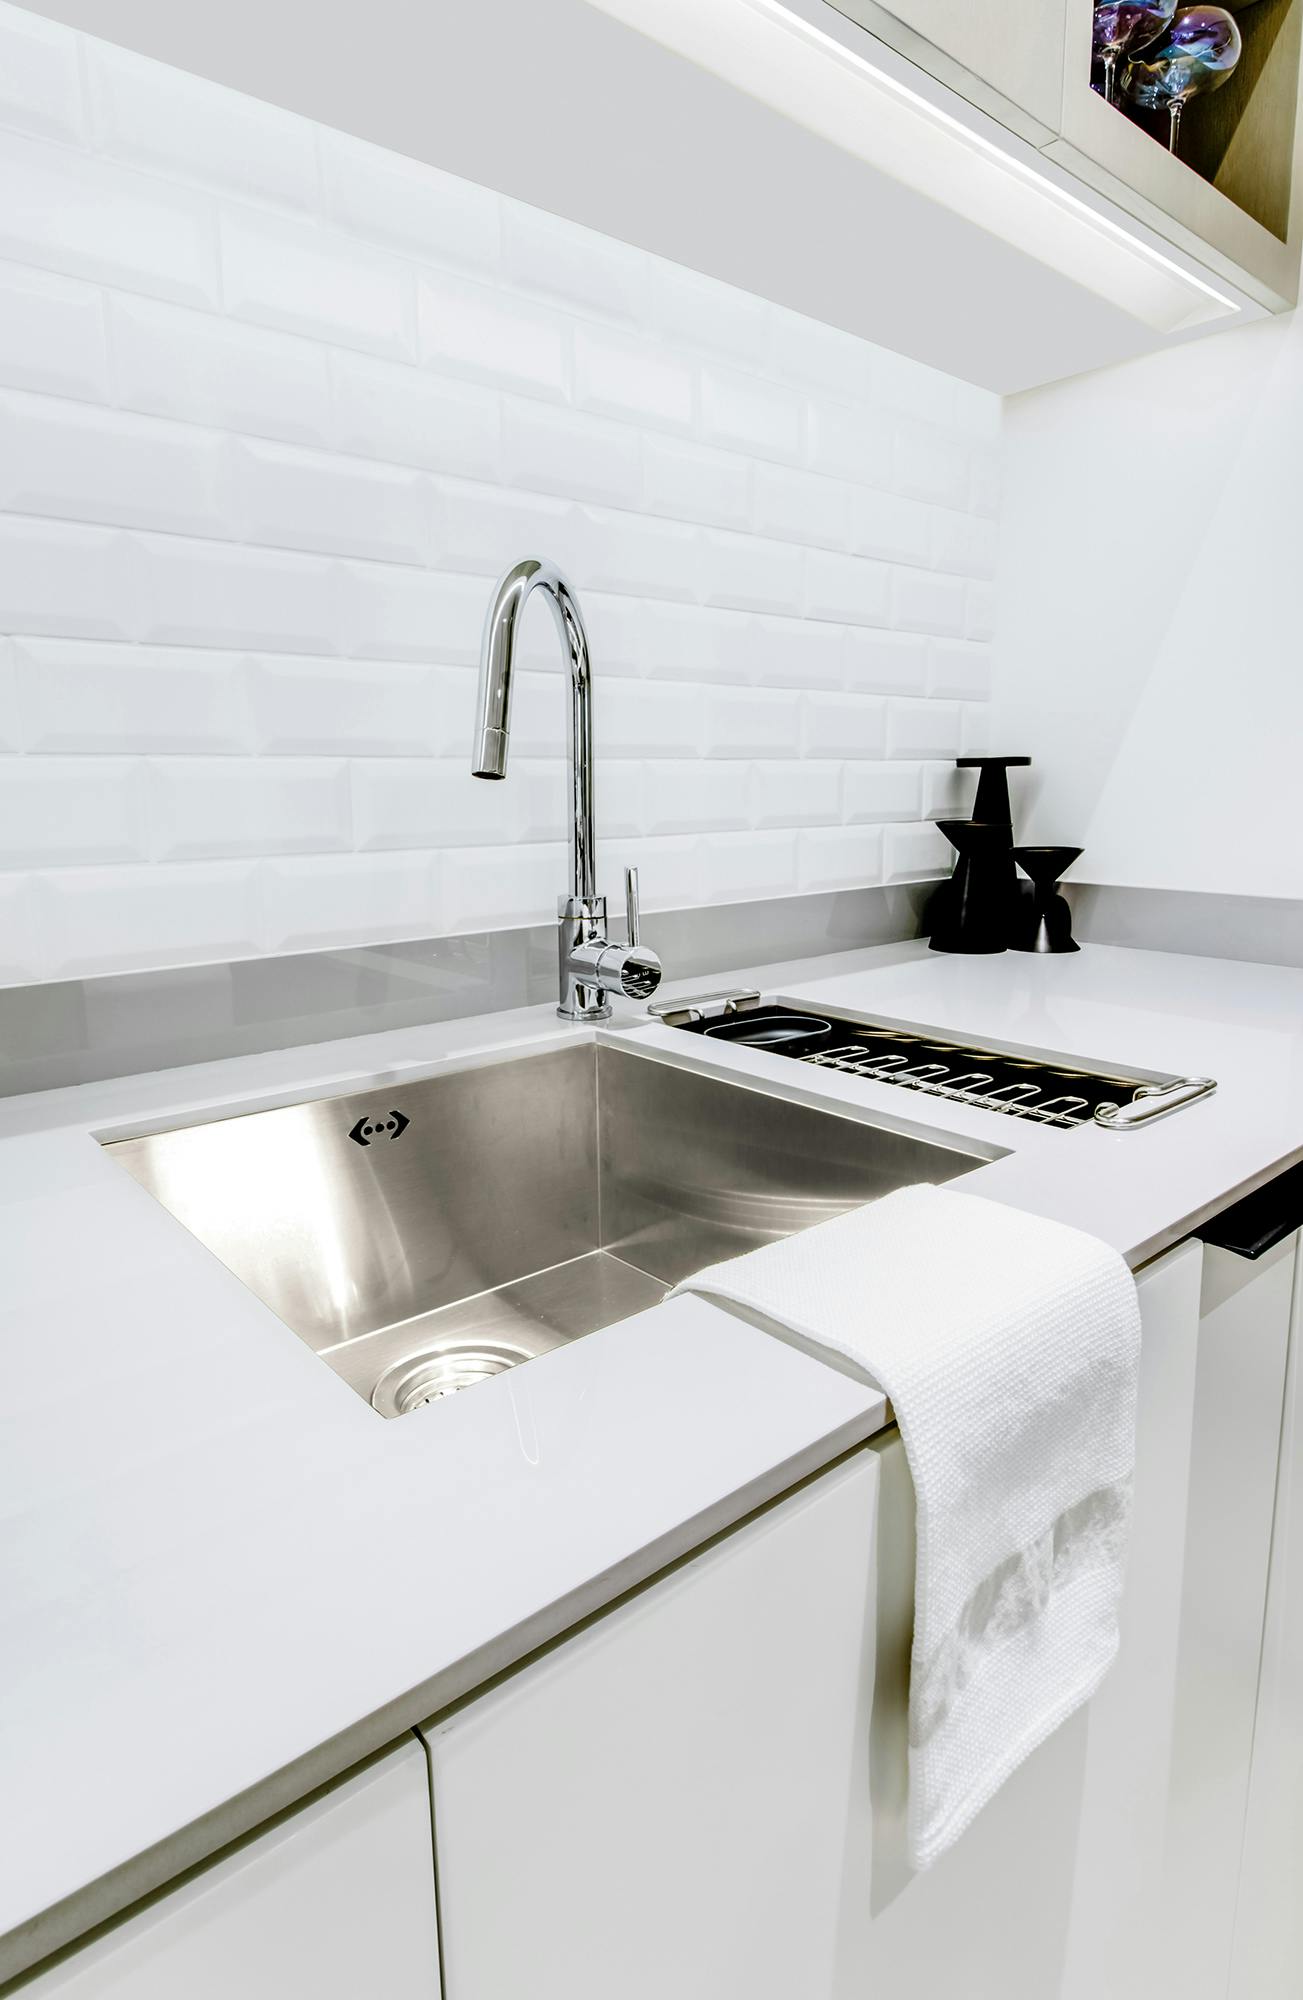 Blog: The Two-Sink Trend: Having A Second Kitchen Sink